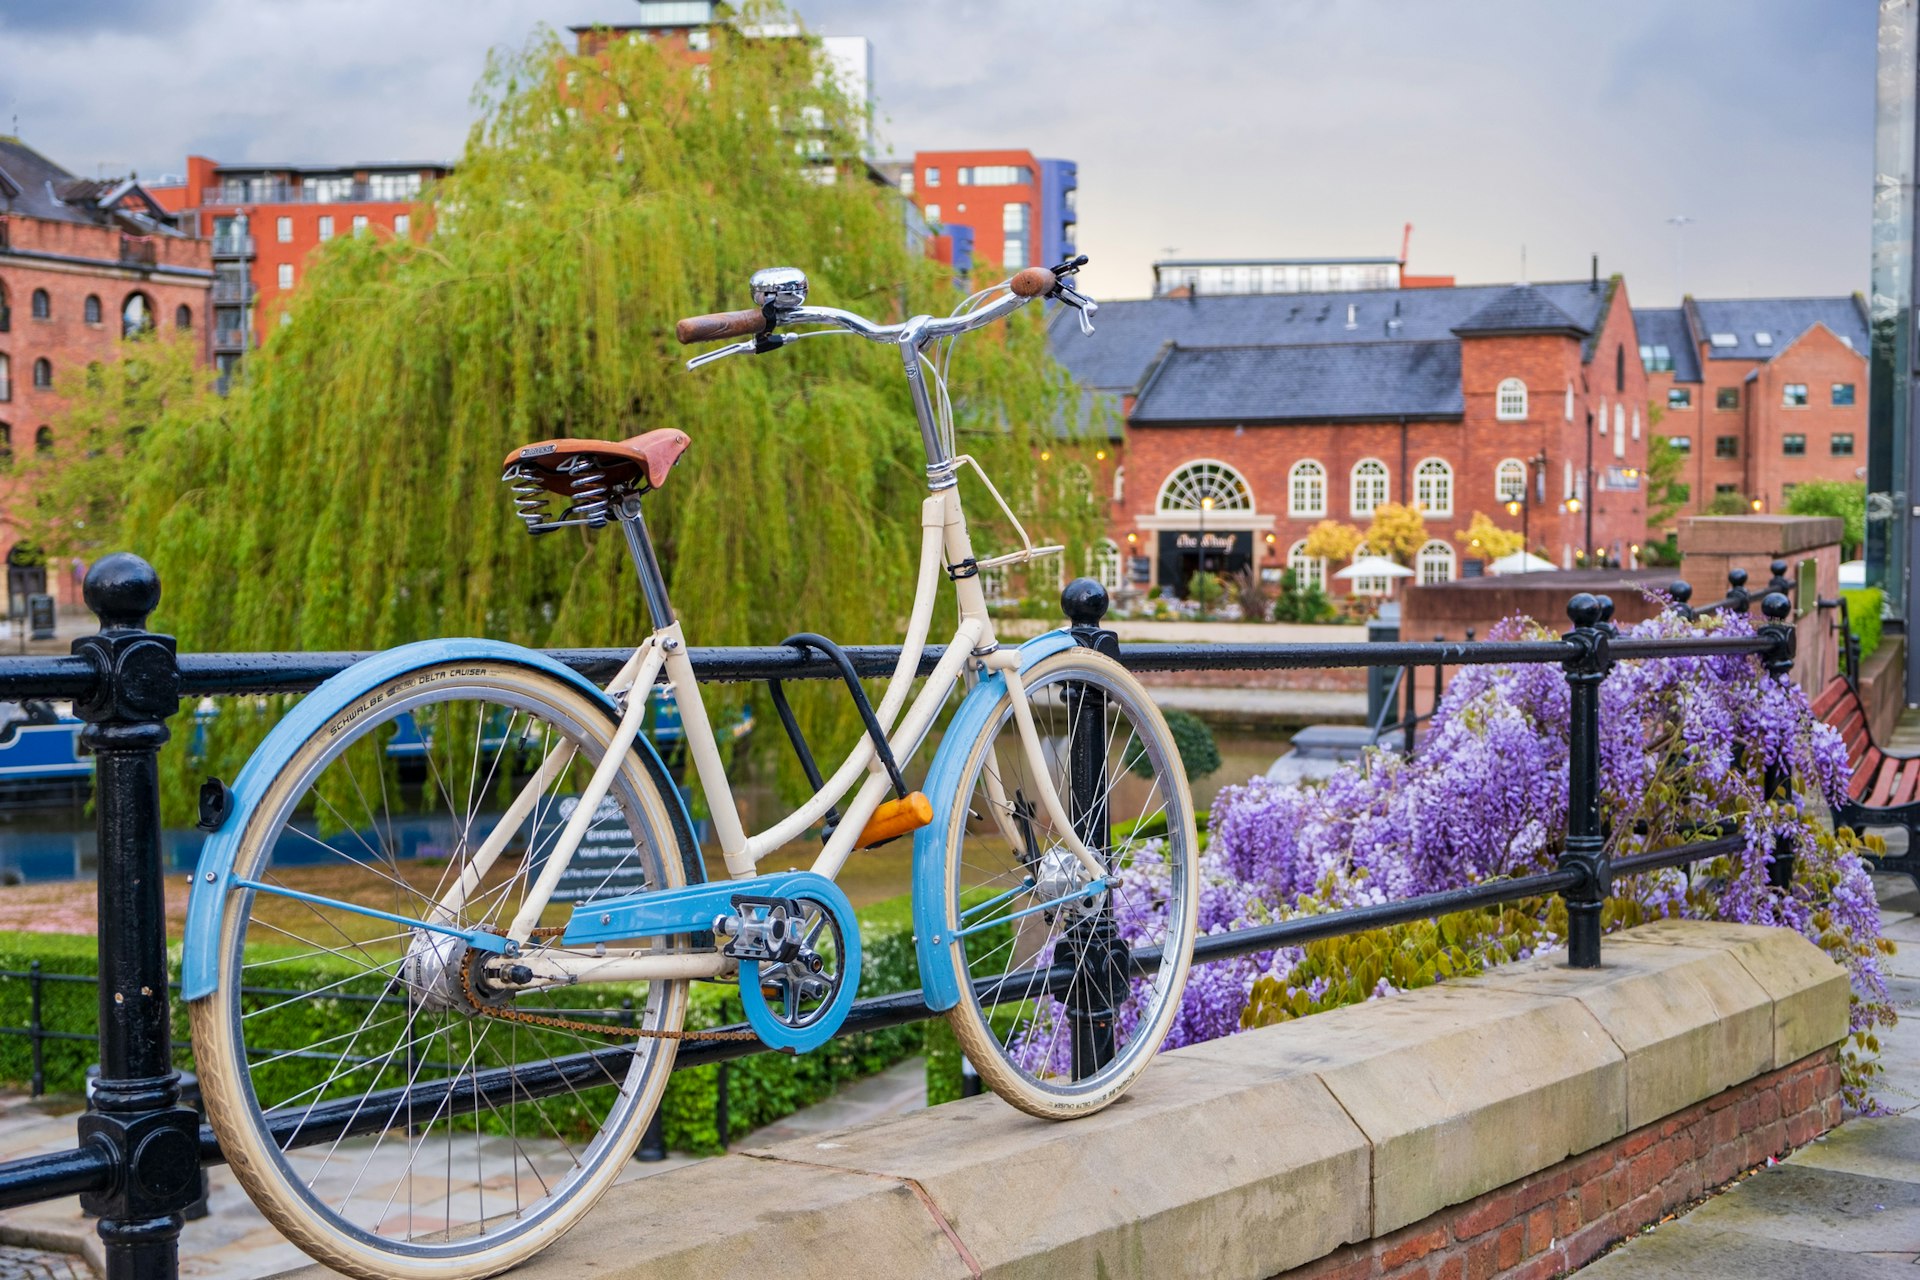 A bicycle parked beside a restored Victorian canal system in the Castlefield area of Manchester. Purple wisteria is flowering on the wall